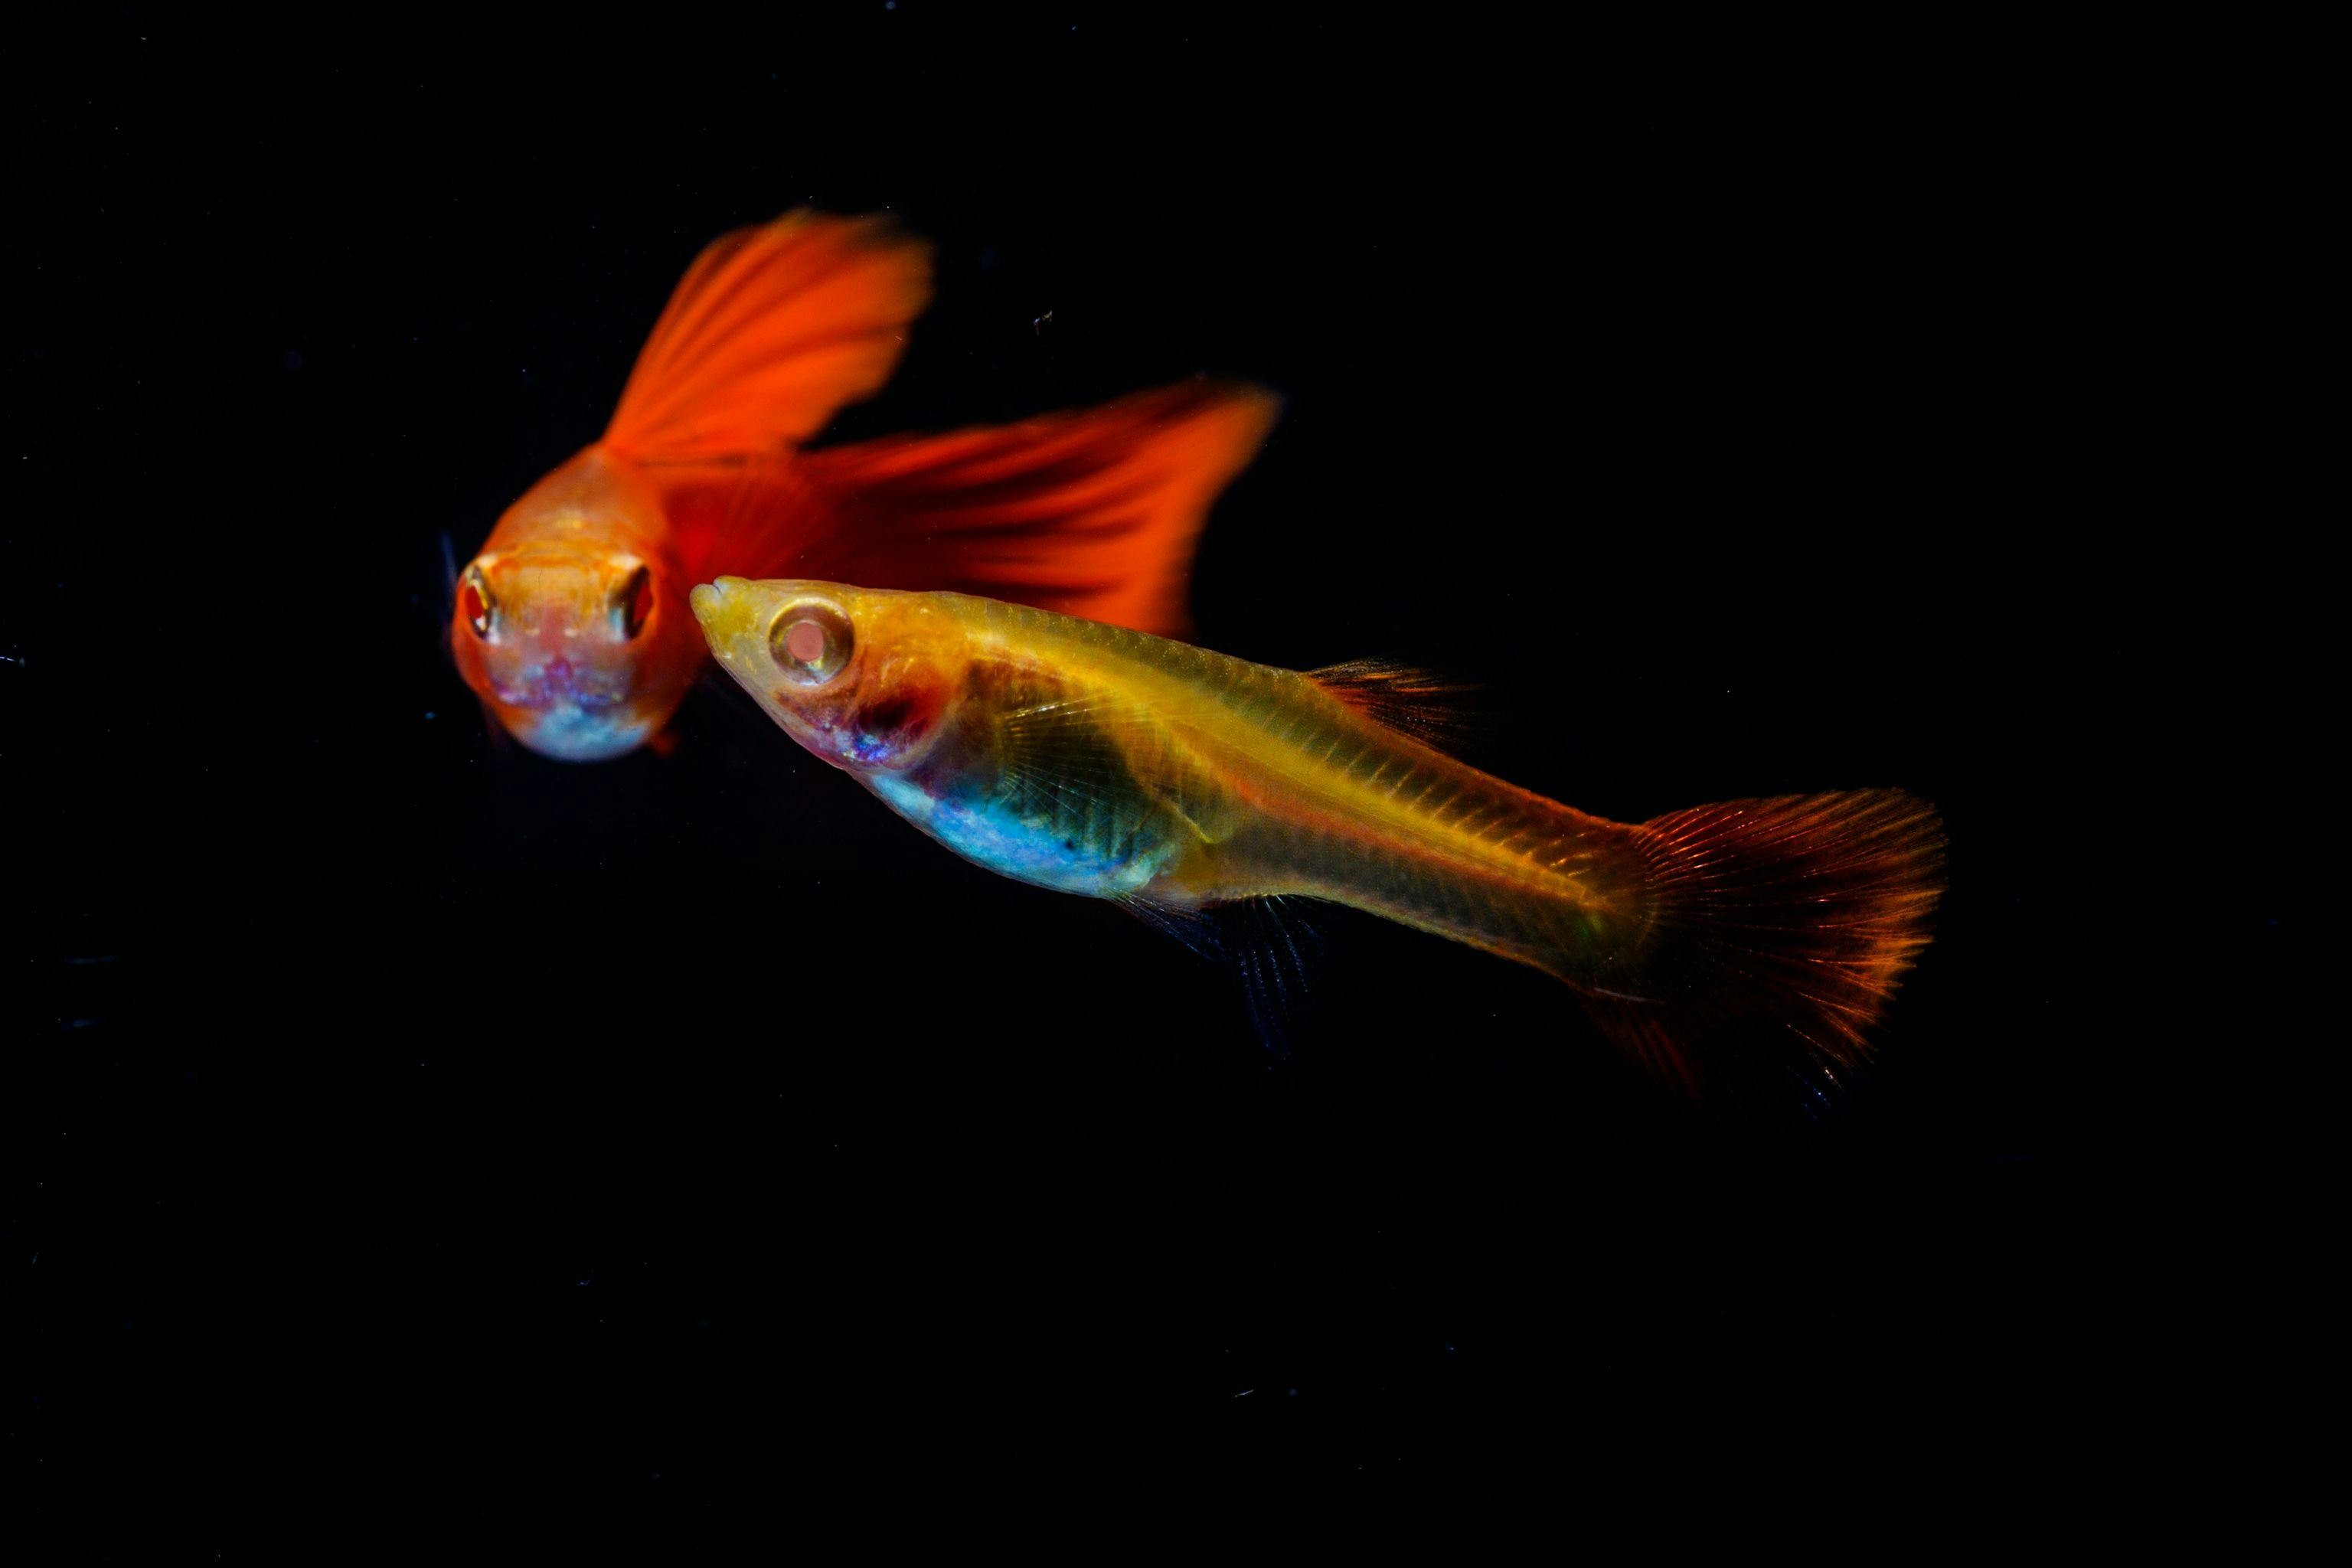 Something’s in the water: Human impact on guppy behavior